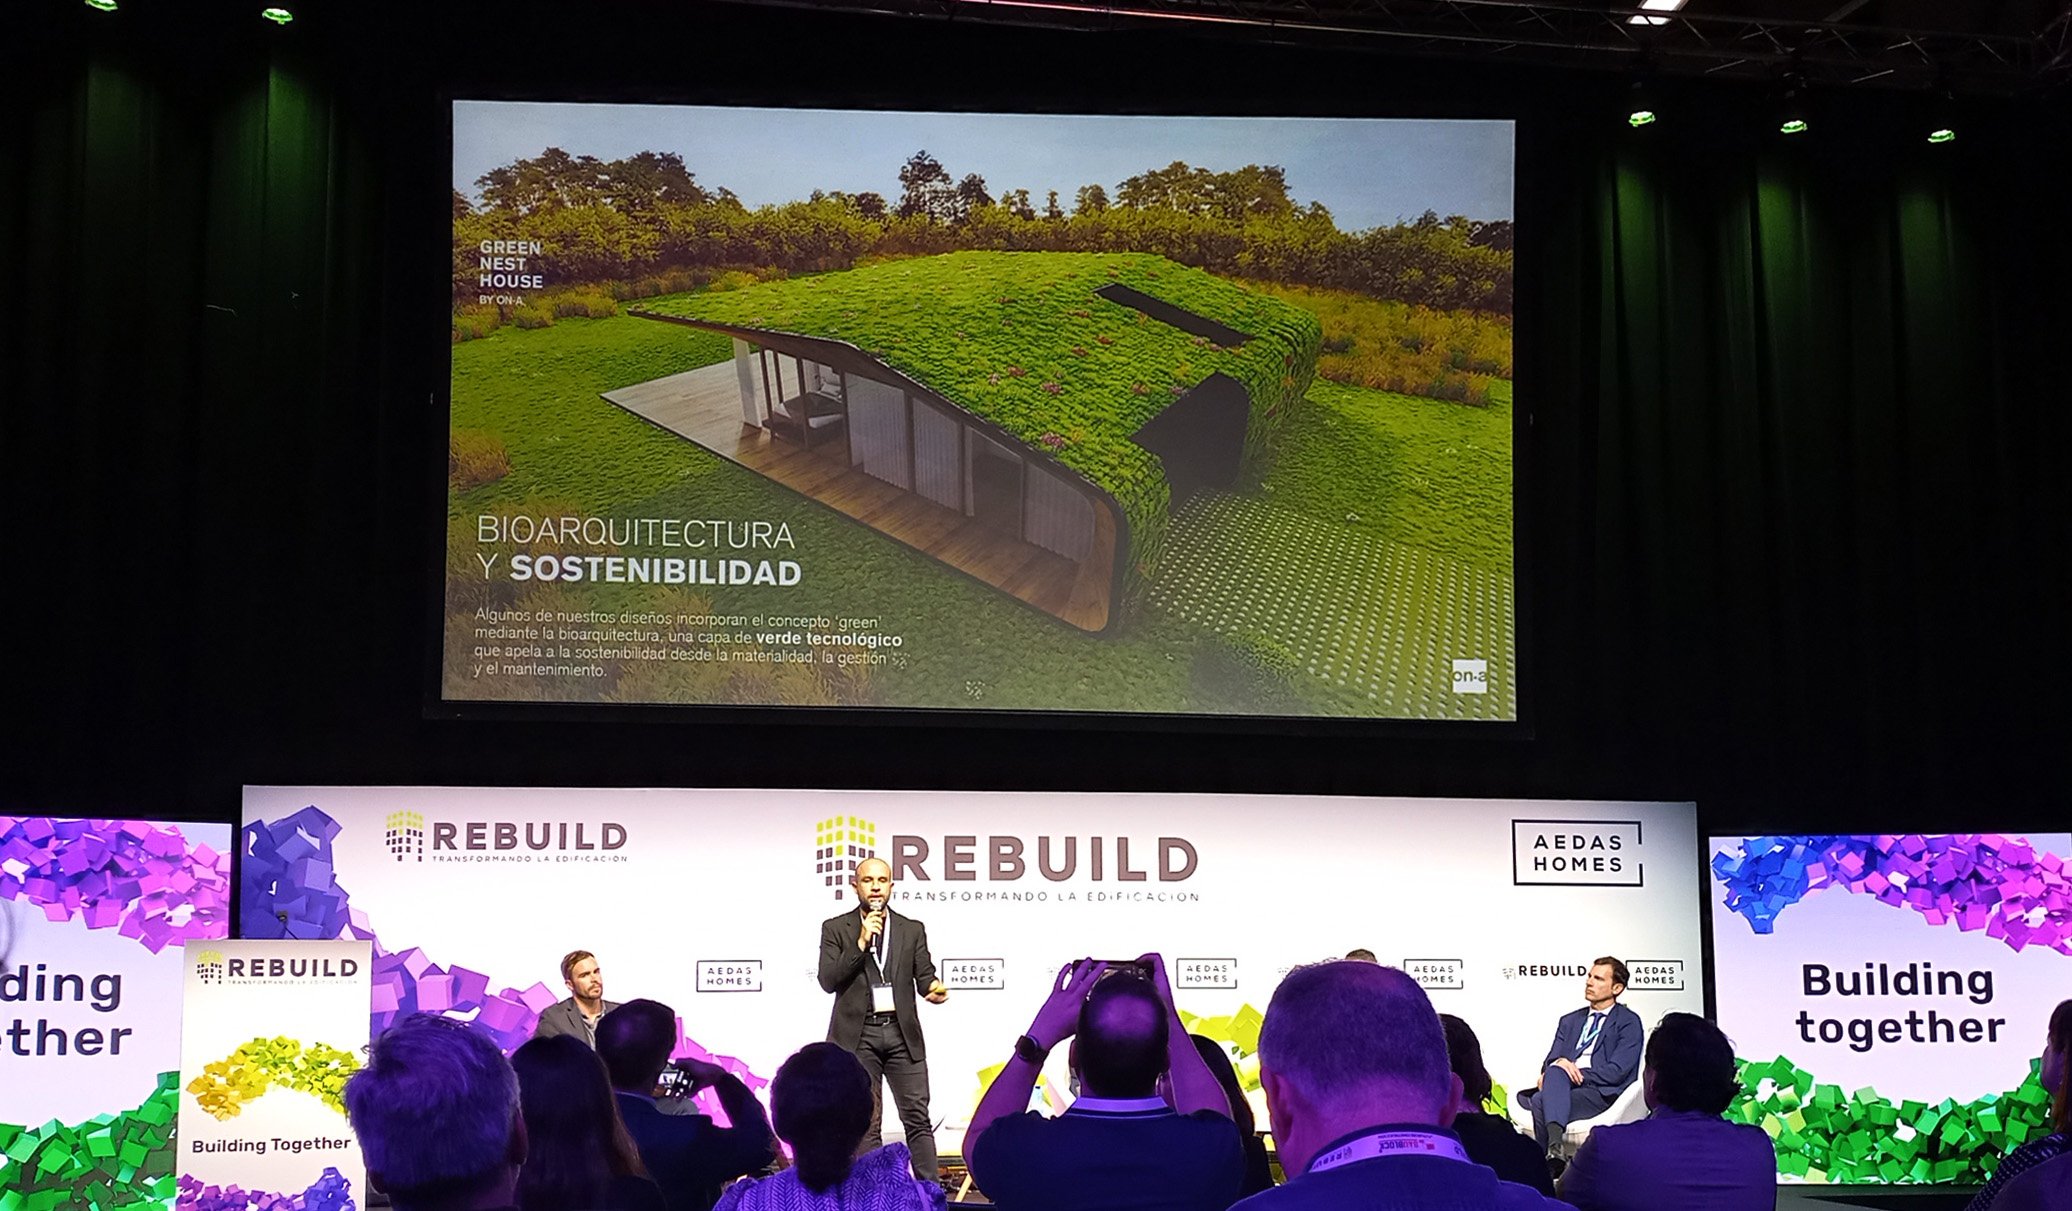 ON-A at REBUILD 2023, a space for learning and synergies - we are happy to see how the building sector is advancing, albeit little by little, in digitisation, industrialisation, sustainability, and innovation.